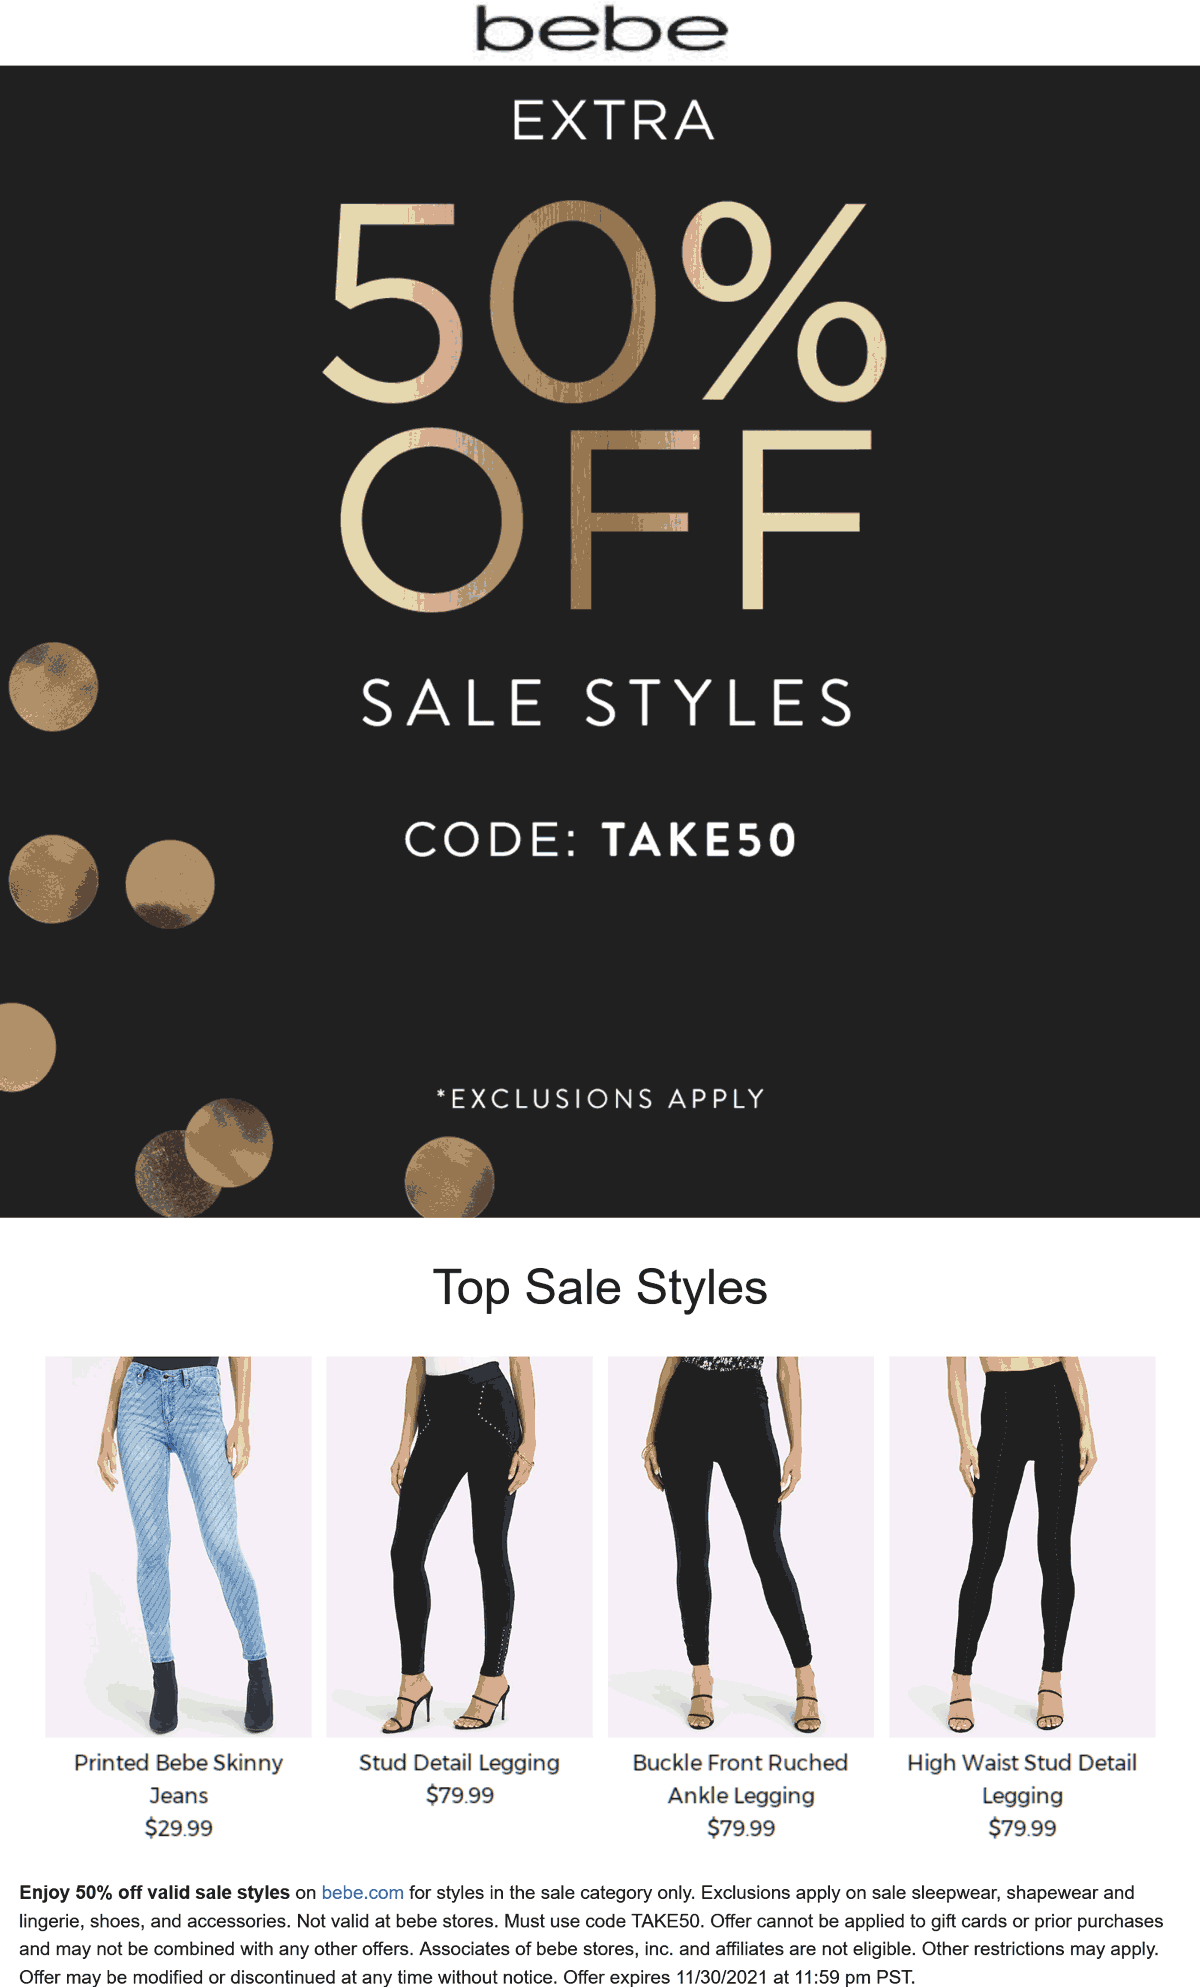 bebe stores Coupon  Extra 50% off sale styles online today at bebe via promo code TAKE50 #bebe 